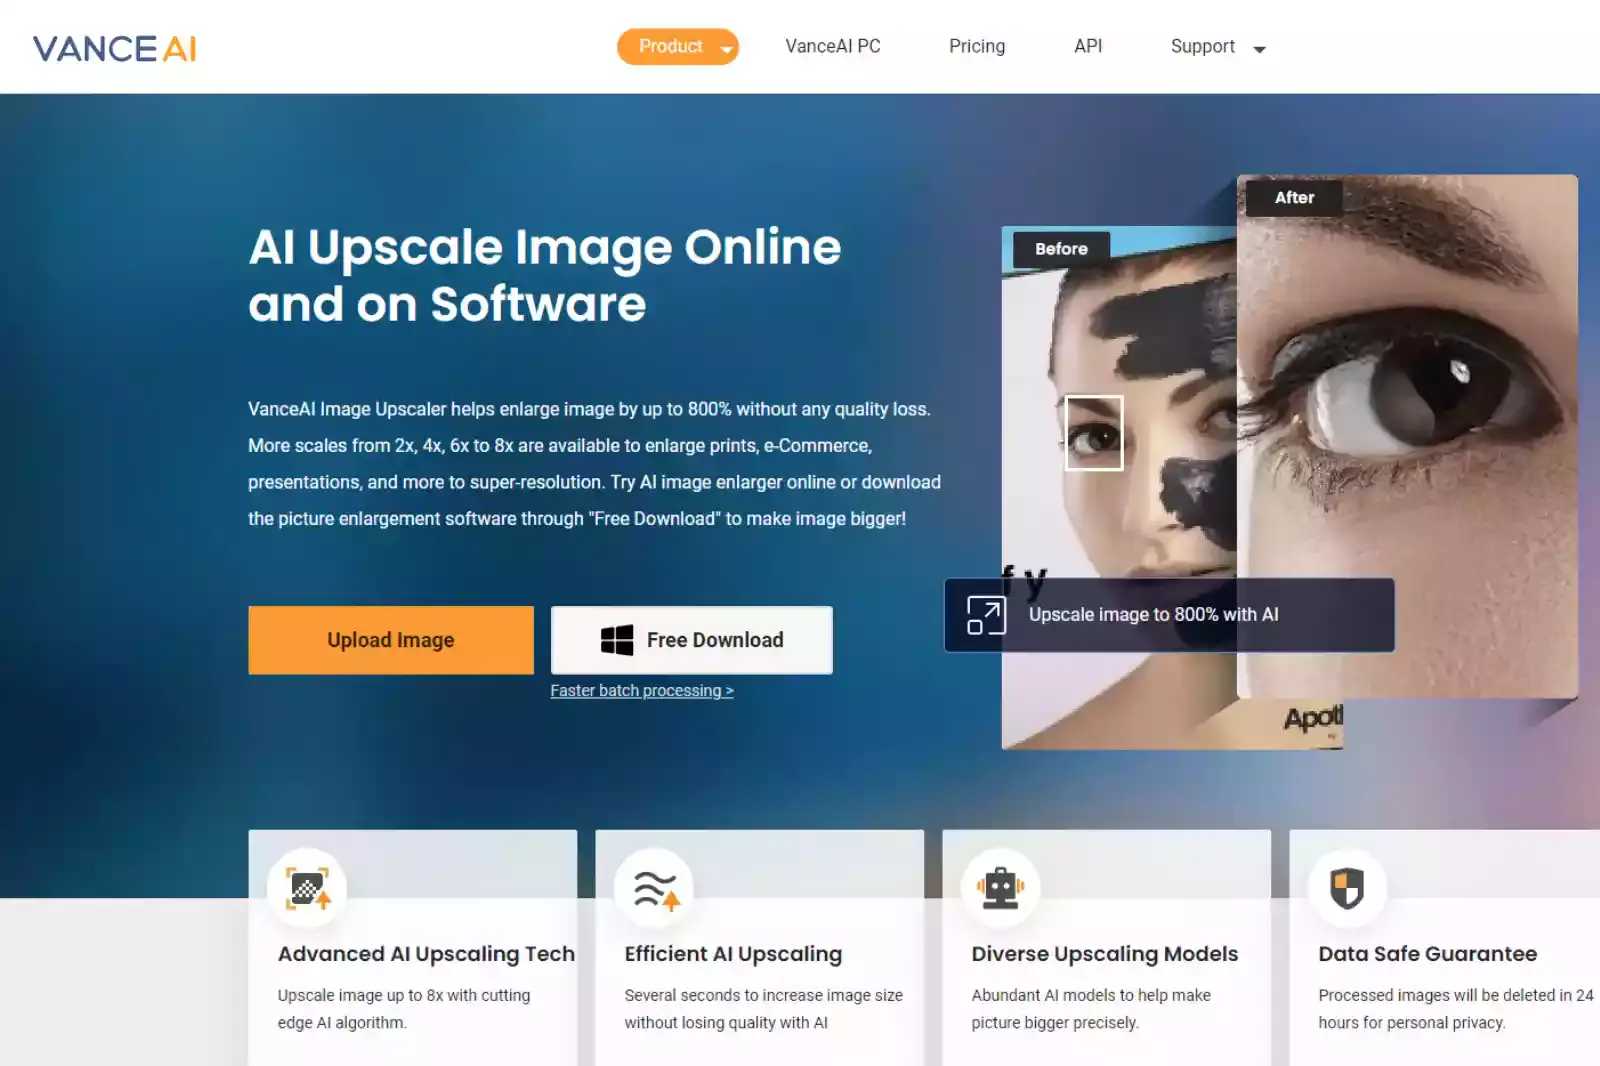 Home Page of VanceAI Image Upscaler